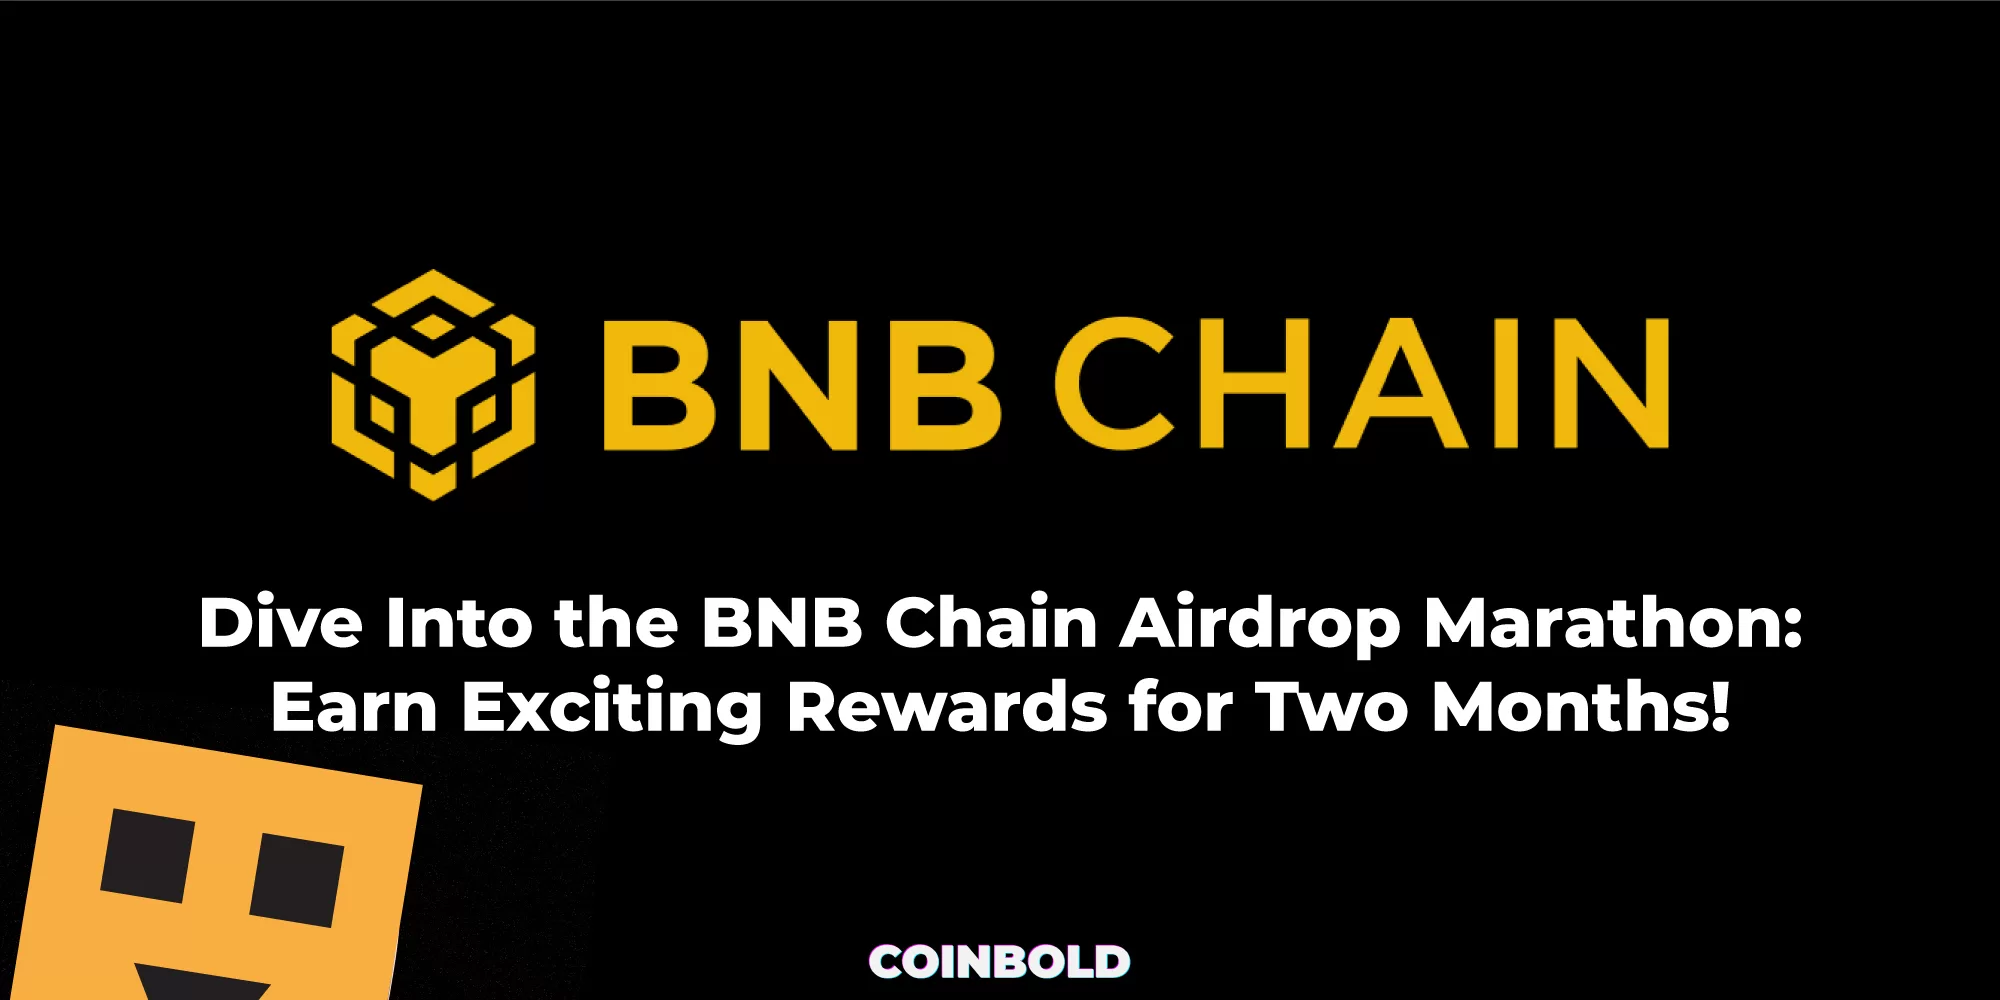 Dive Into the BNB Chain Airdrop Marathon Earn Exciting Rewards for Two Months!